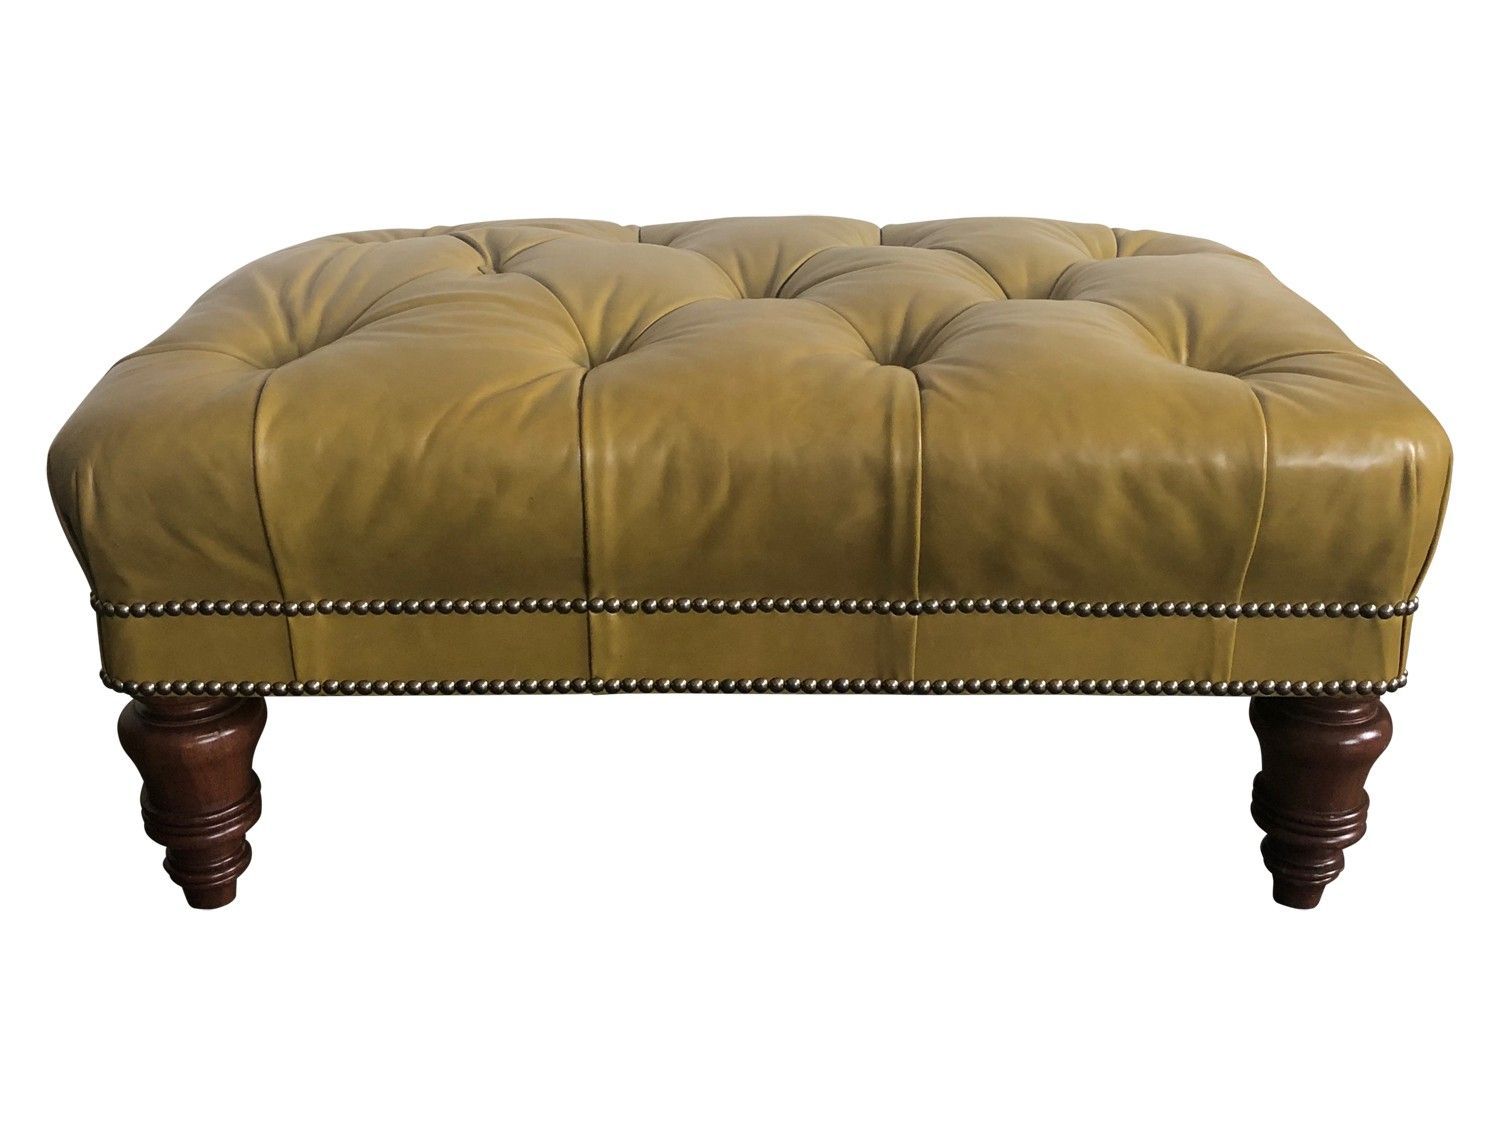 Leather Tufted Ottoman With Silver Nailheads • The Local Vault With Black Leather And Bronze Steel Tufted Ottomans (View 12 of 20)